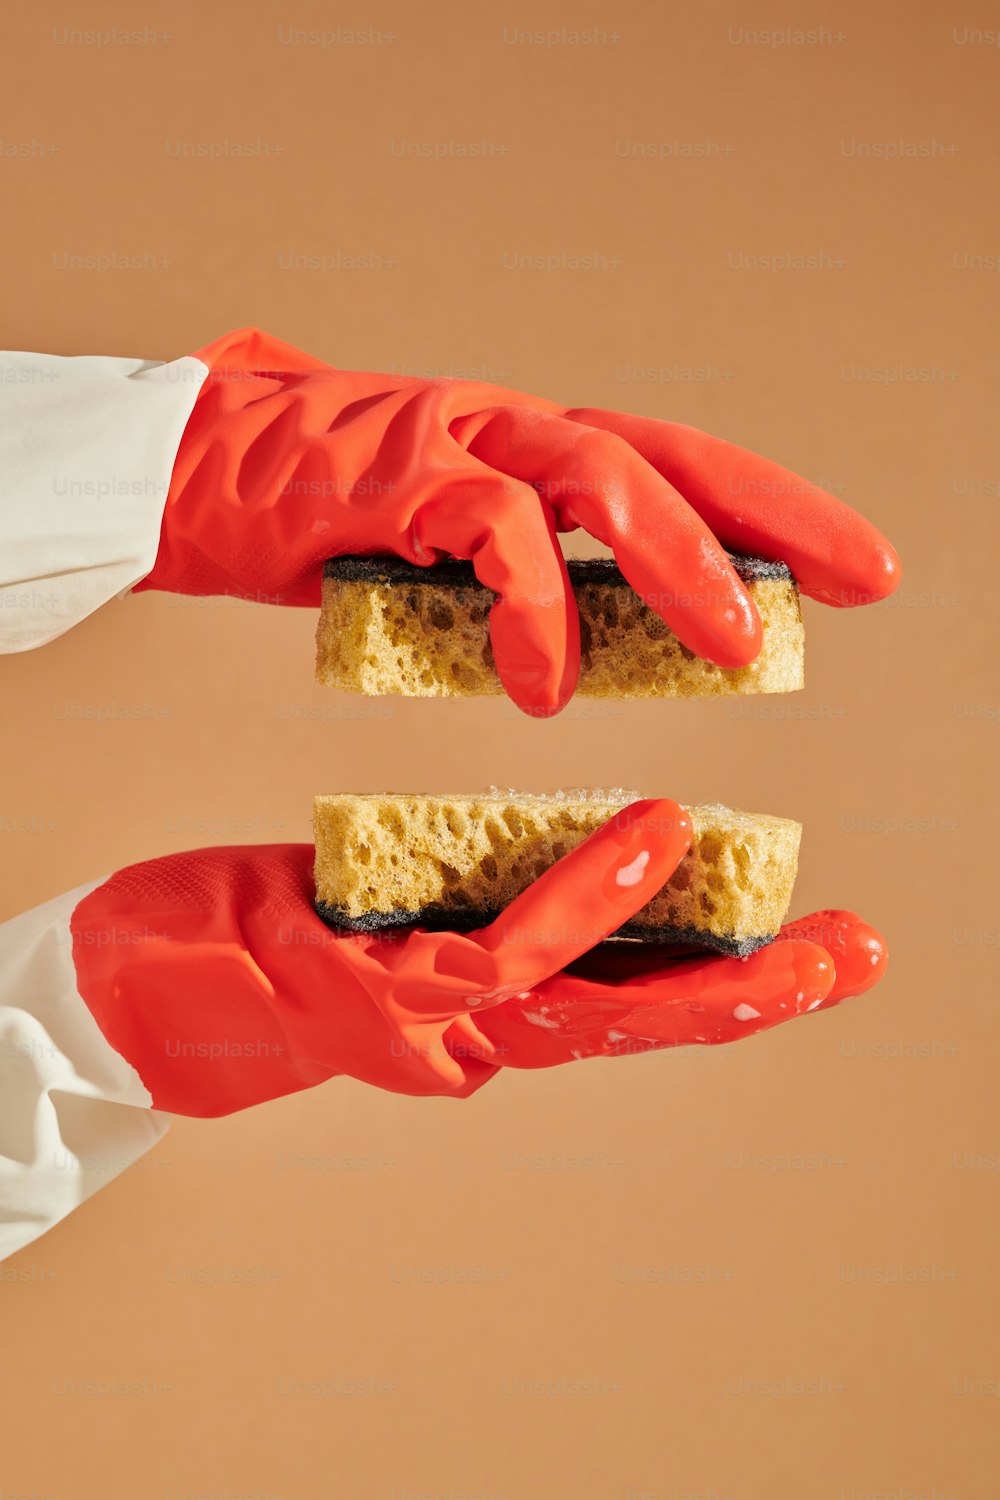 a pair of red gloves holding a piece of bread